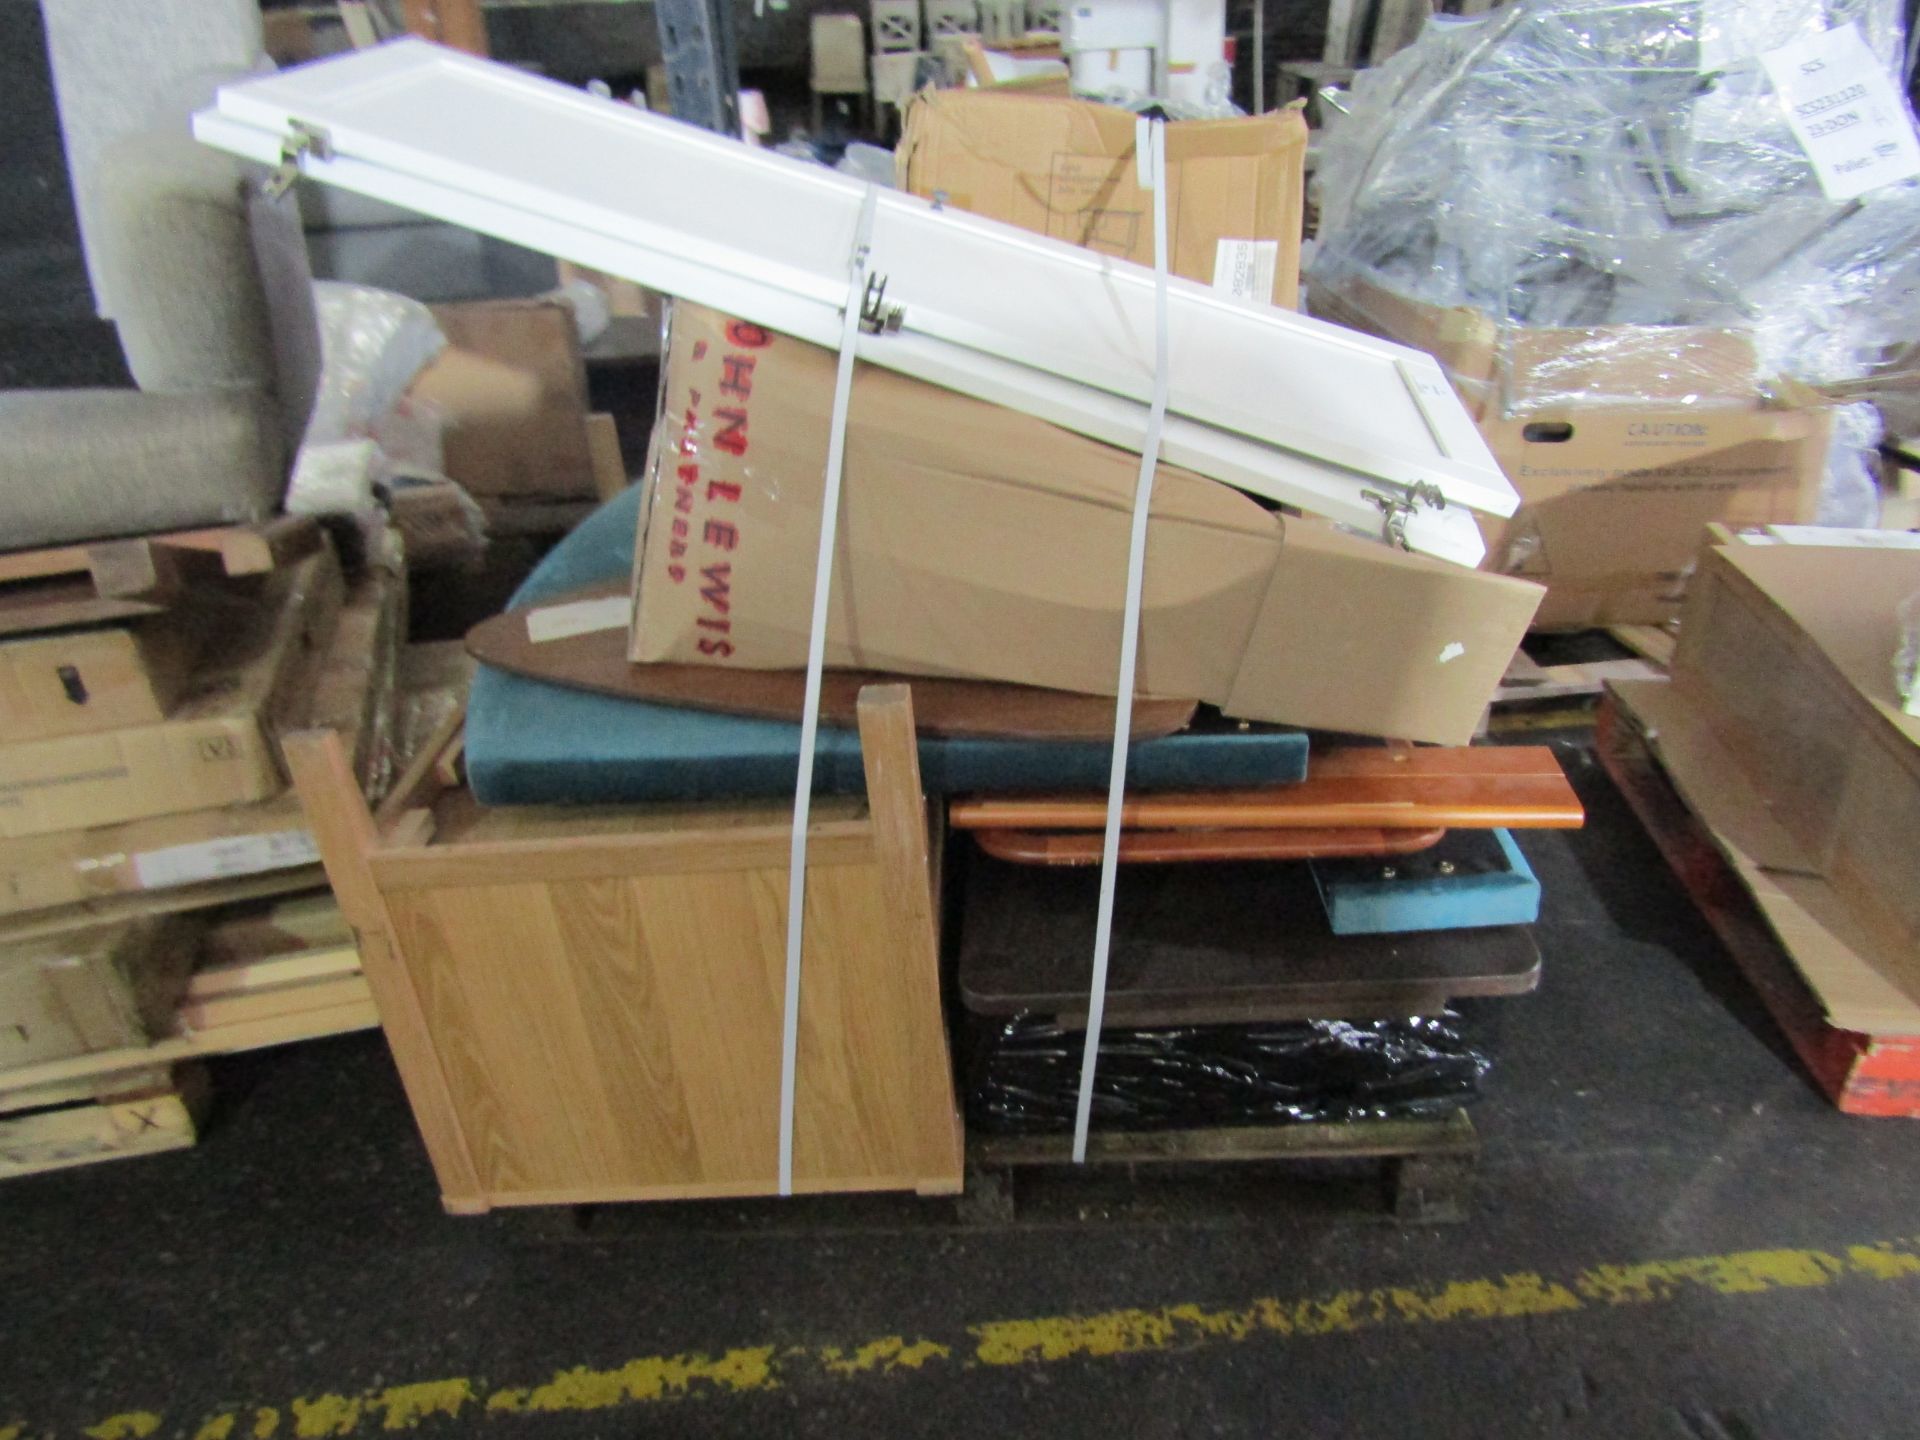 Pallet of unmanifested customer return furniture. All unchecked